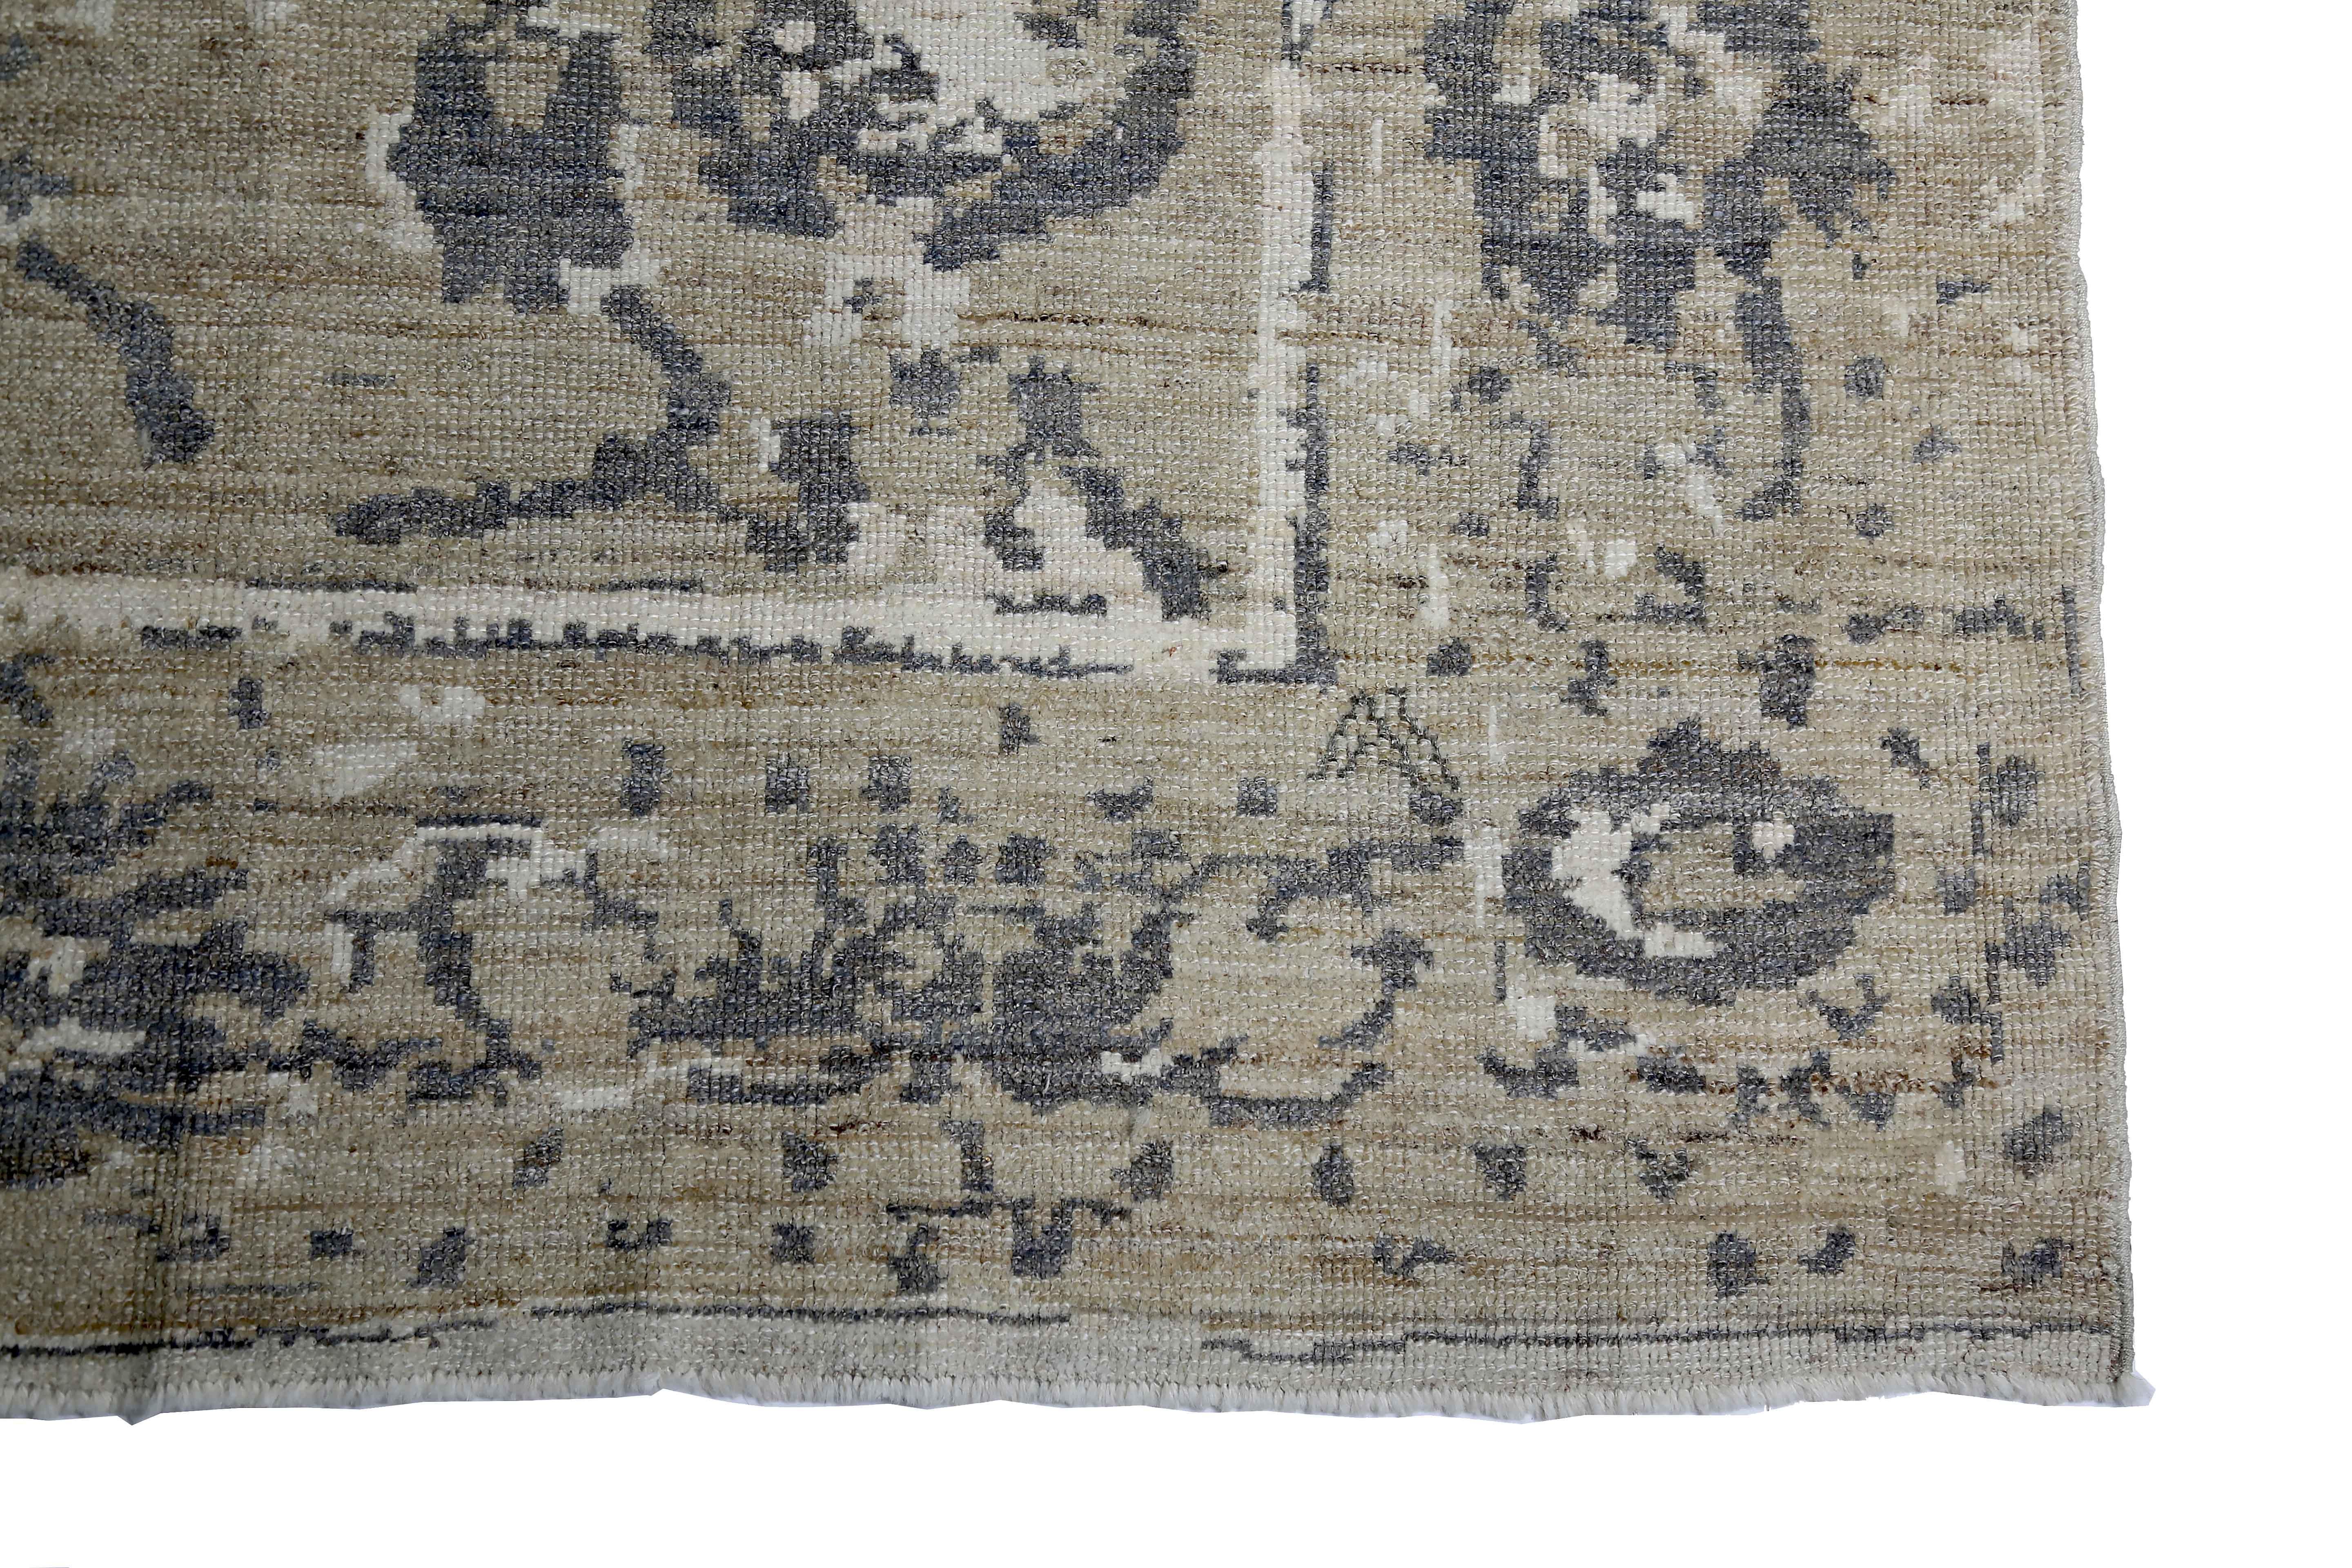 Hand-Woven New Turkish Oushak Rug with Gray and White Floral Patterns on Beige Field For Sale